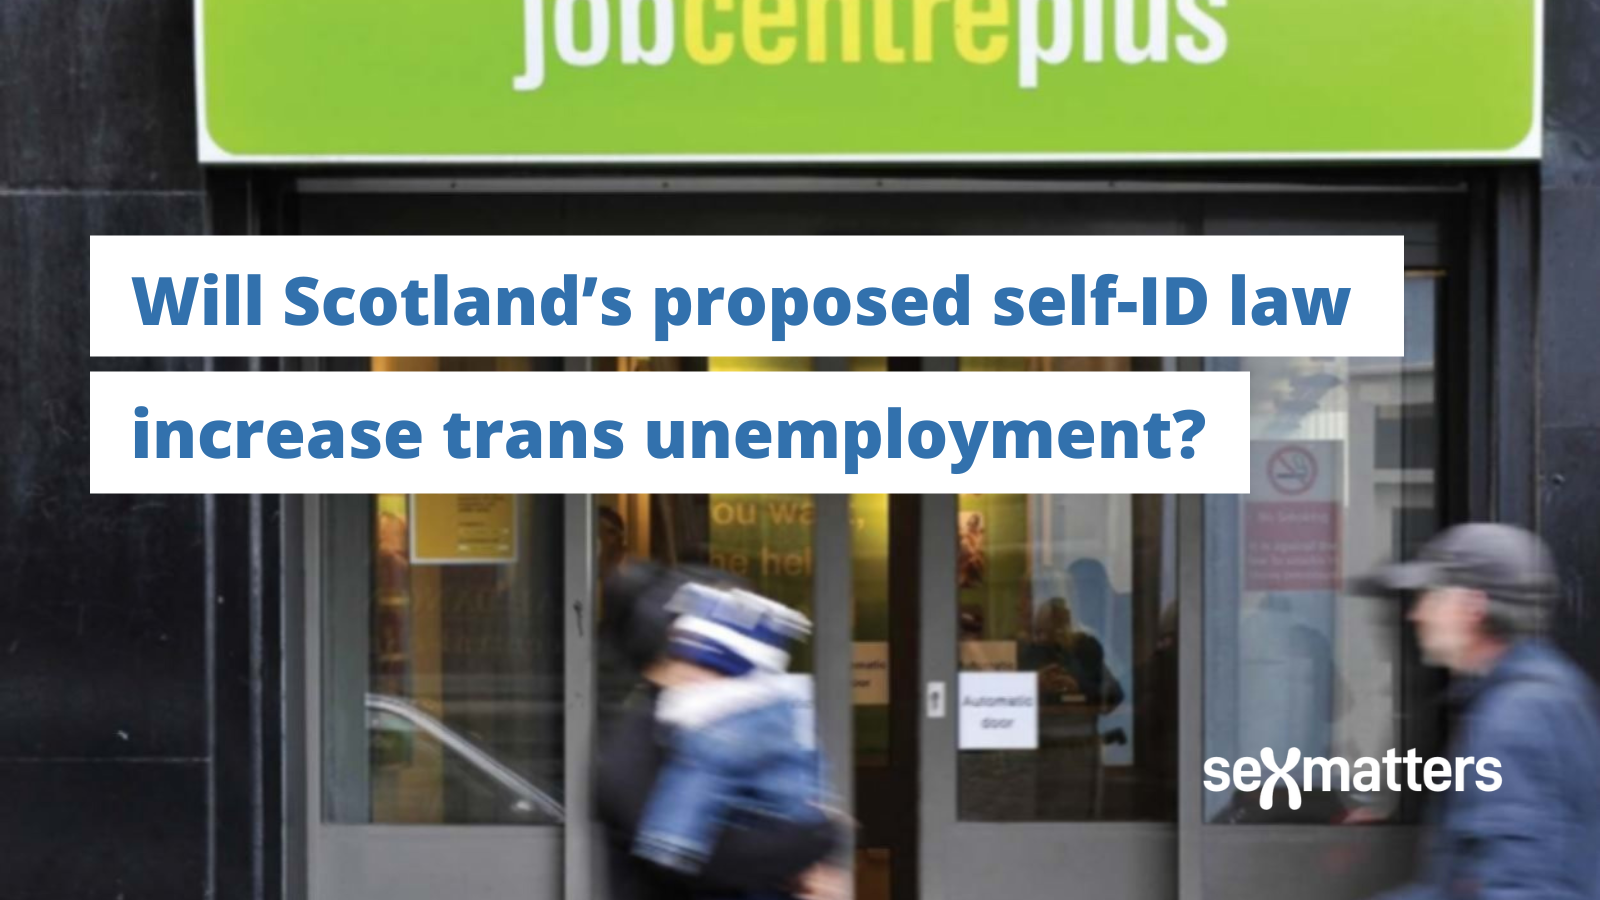 Will Scotland’s proposed self-ID law increase trans unemployment?